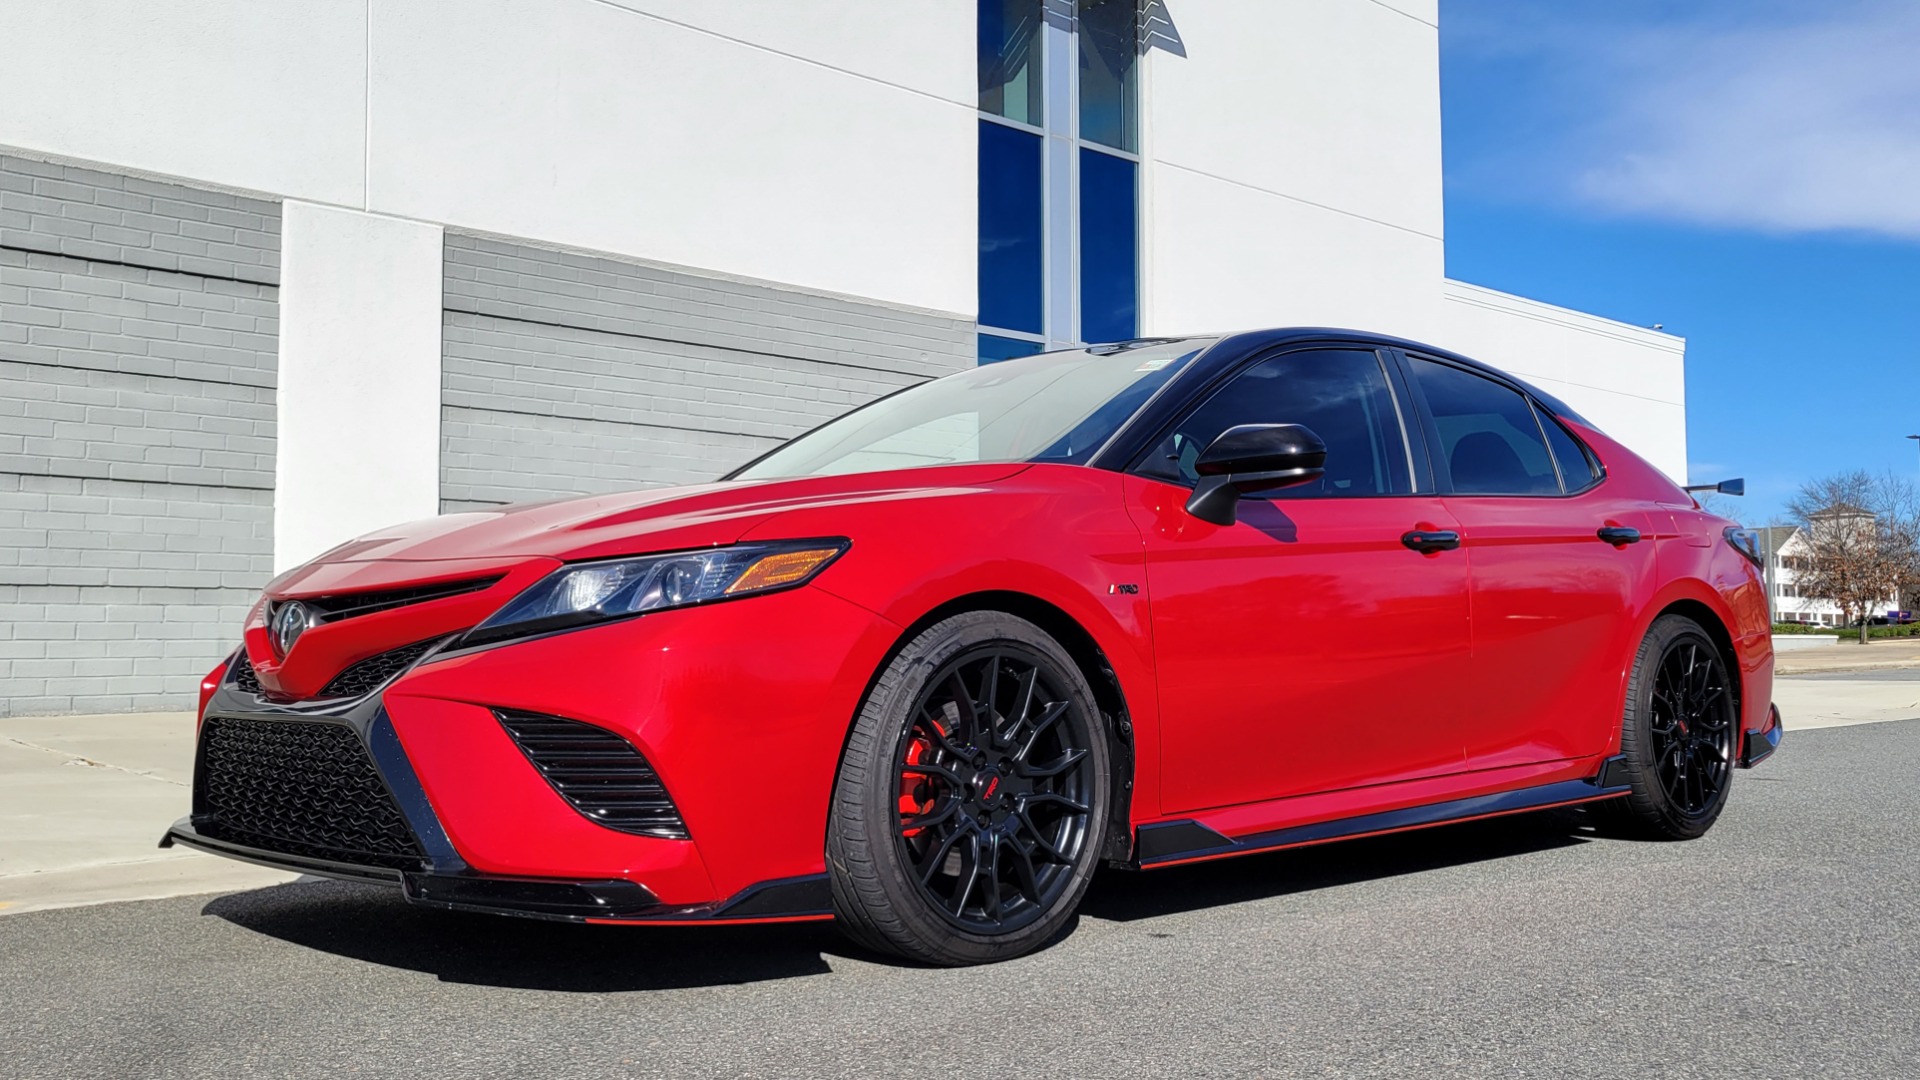 Used 2020 Toyota CAMRY TRD 3.5L V6 SEDAN / 8-SPEED AUTO / CLOTH SEATS / REARVIEW for sale $35,995 at Formula Imports in Charlotte NC 28227 4